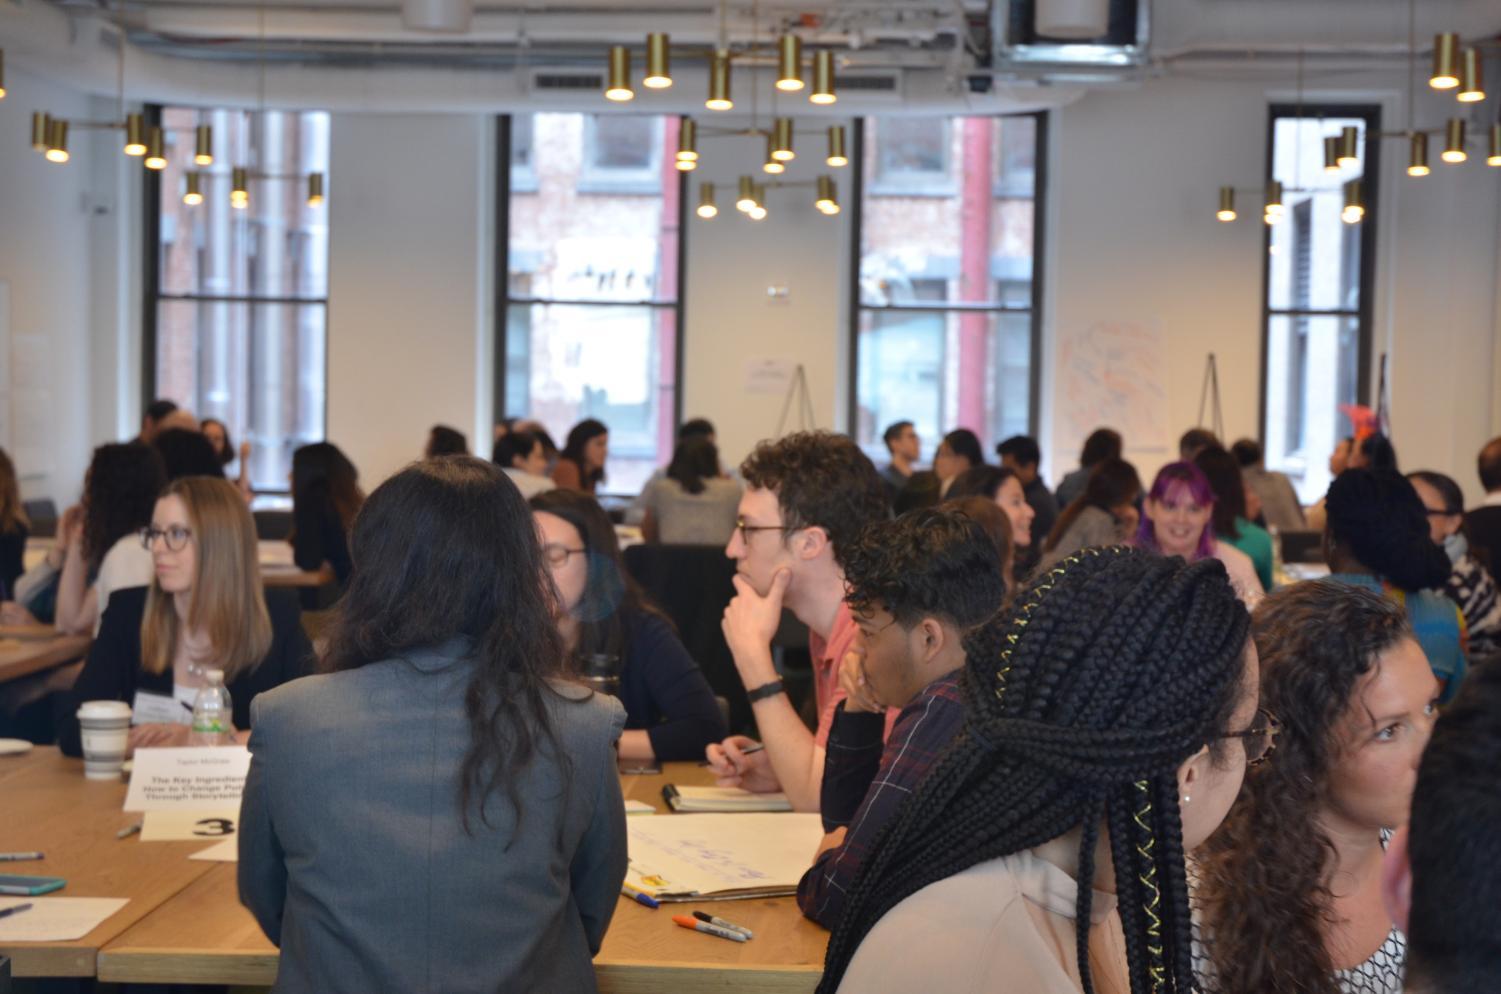 Steinhardt%E2%80%99s+Community+Gets+Together+to+Discuss+Education+Reform+in+New+York+City